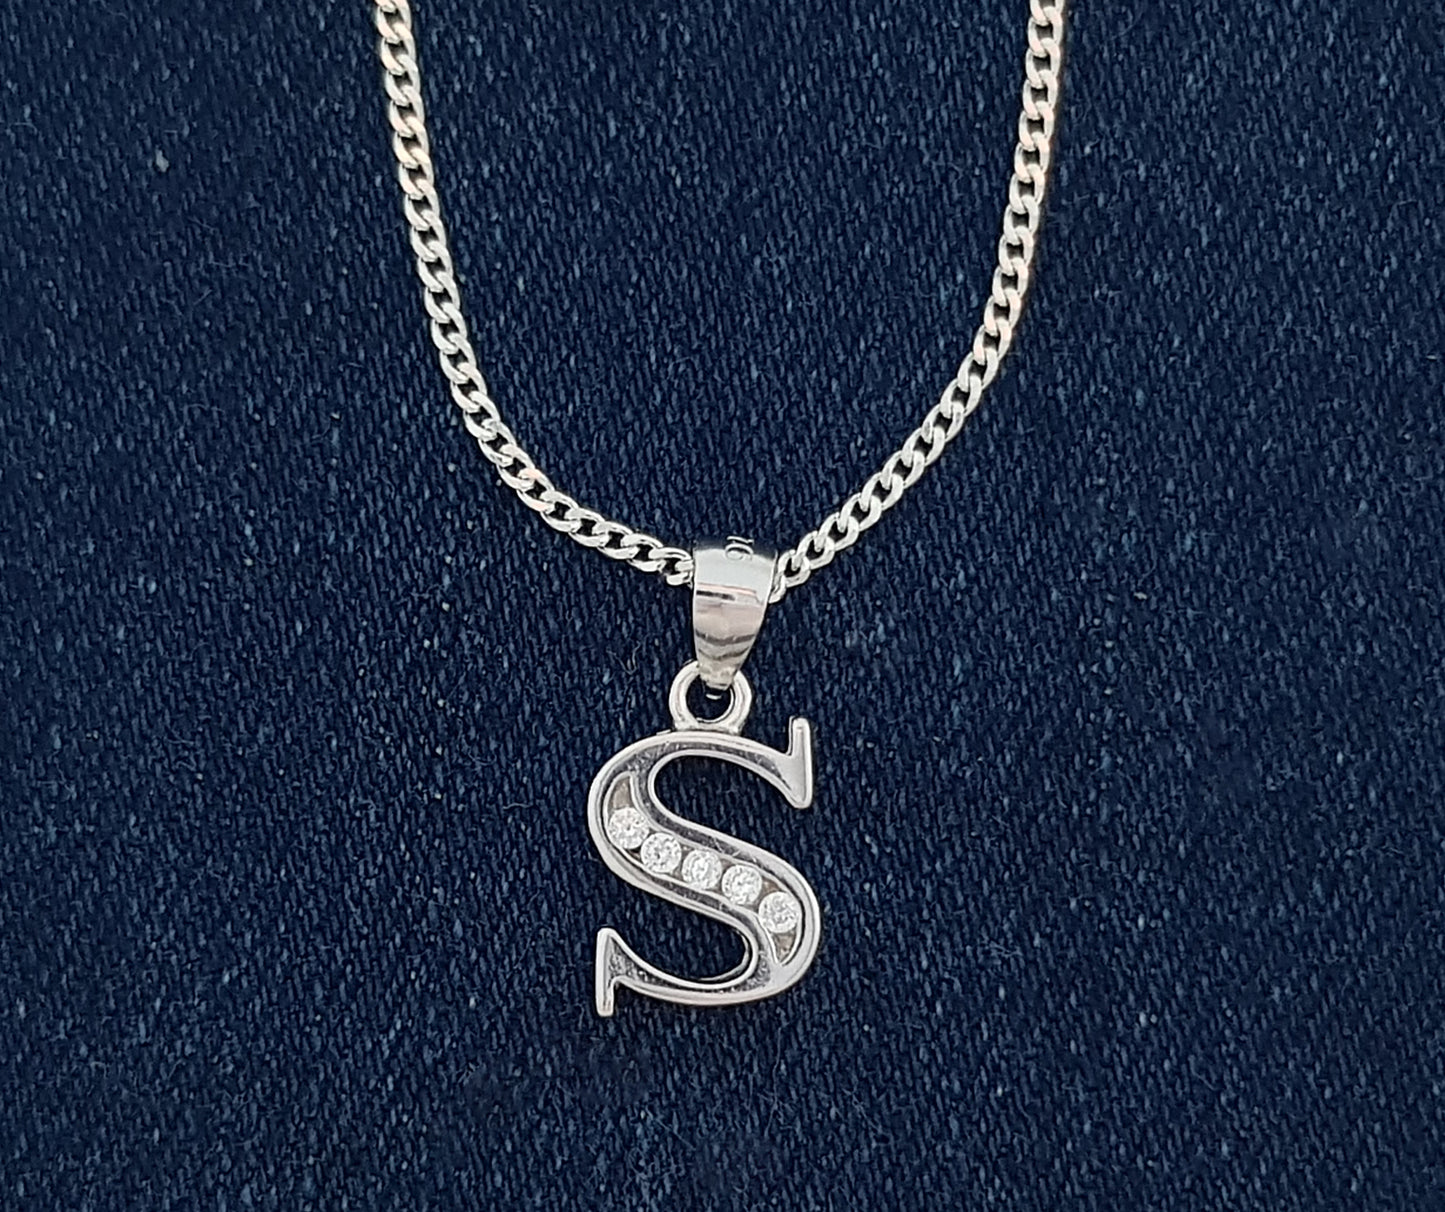 Sterling Silver Initial with Cubic Zirconia Stones- "S" Initial or Letter